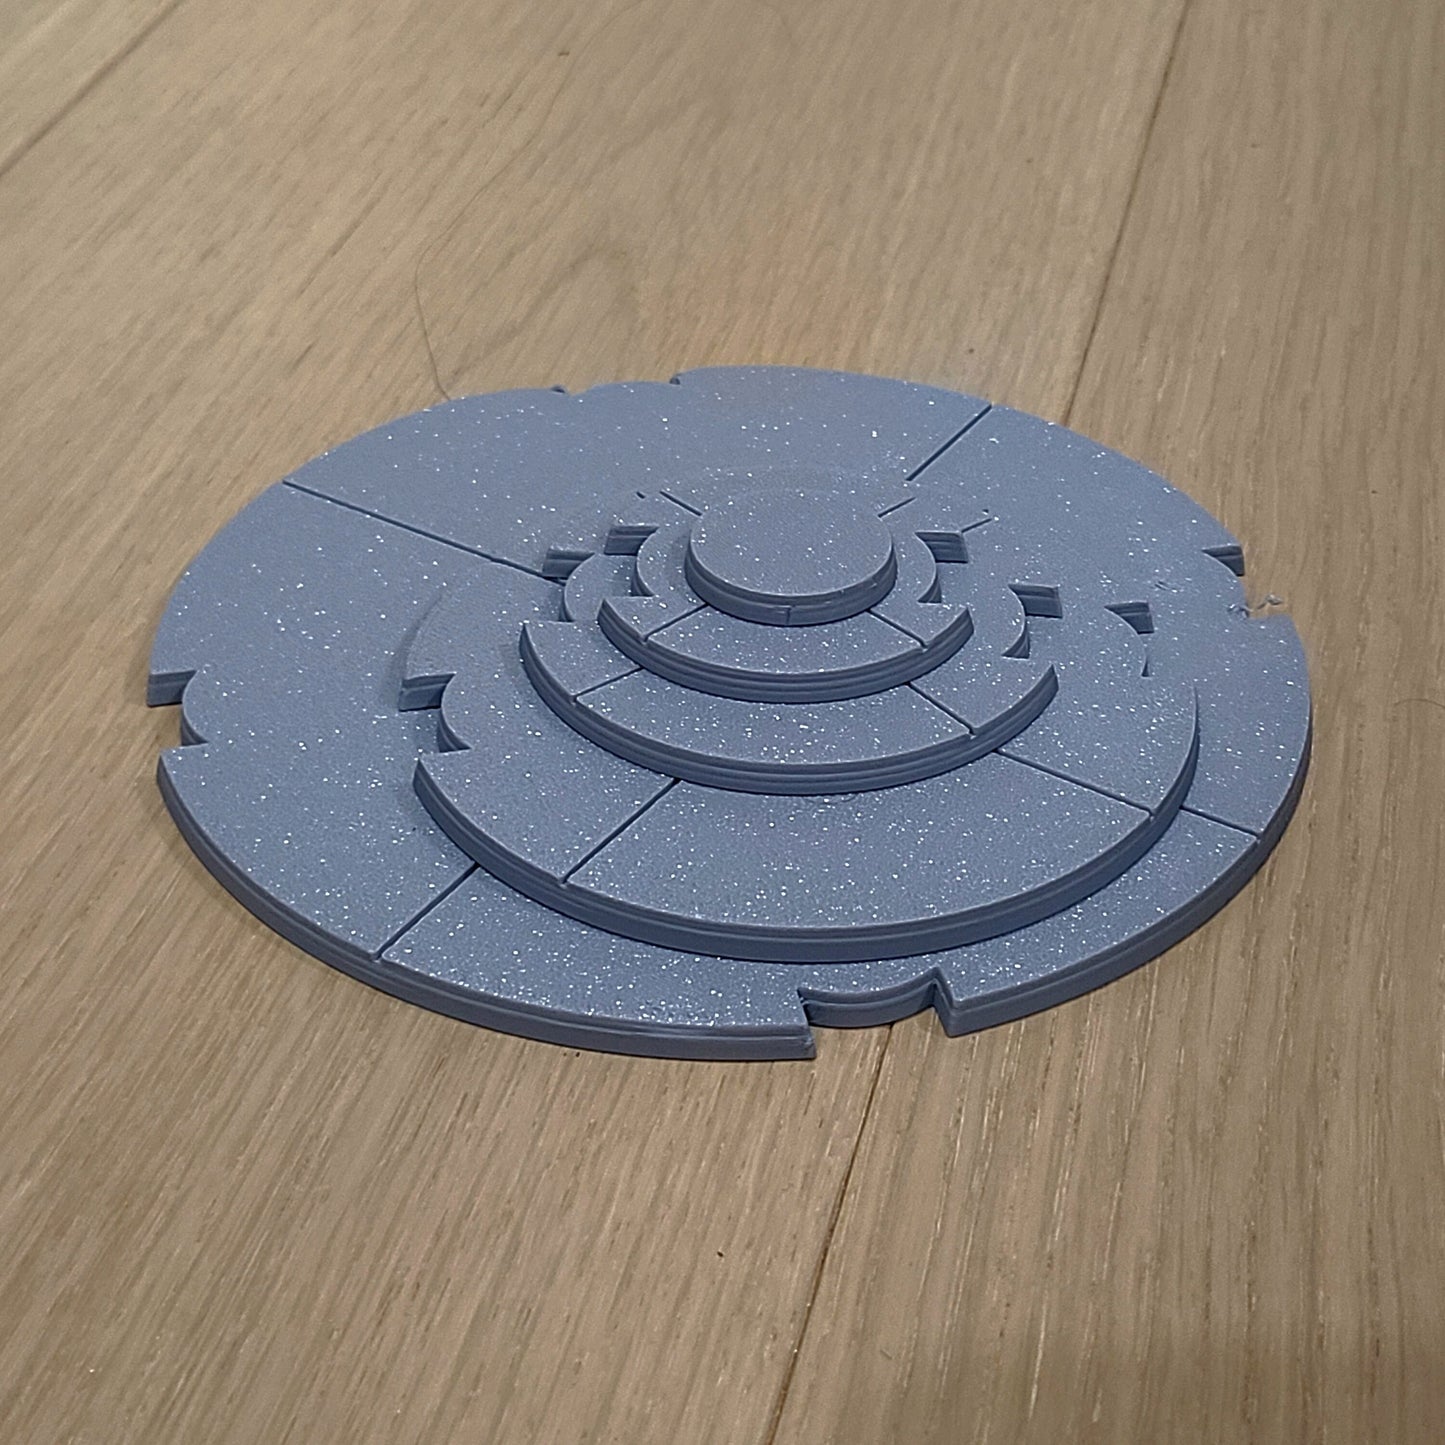 SW Legion compatible bases - 3D printed - Science Fiction RPG Bases